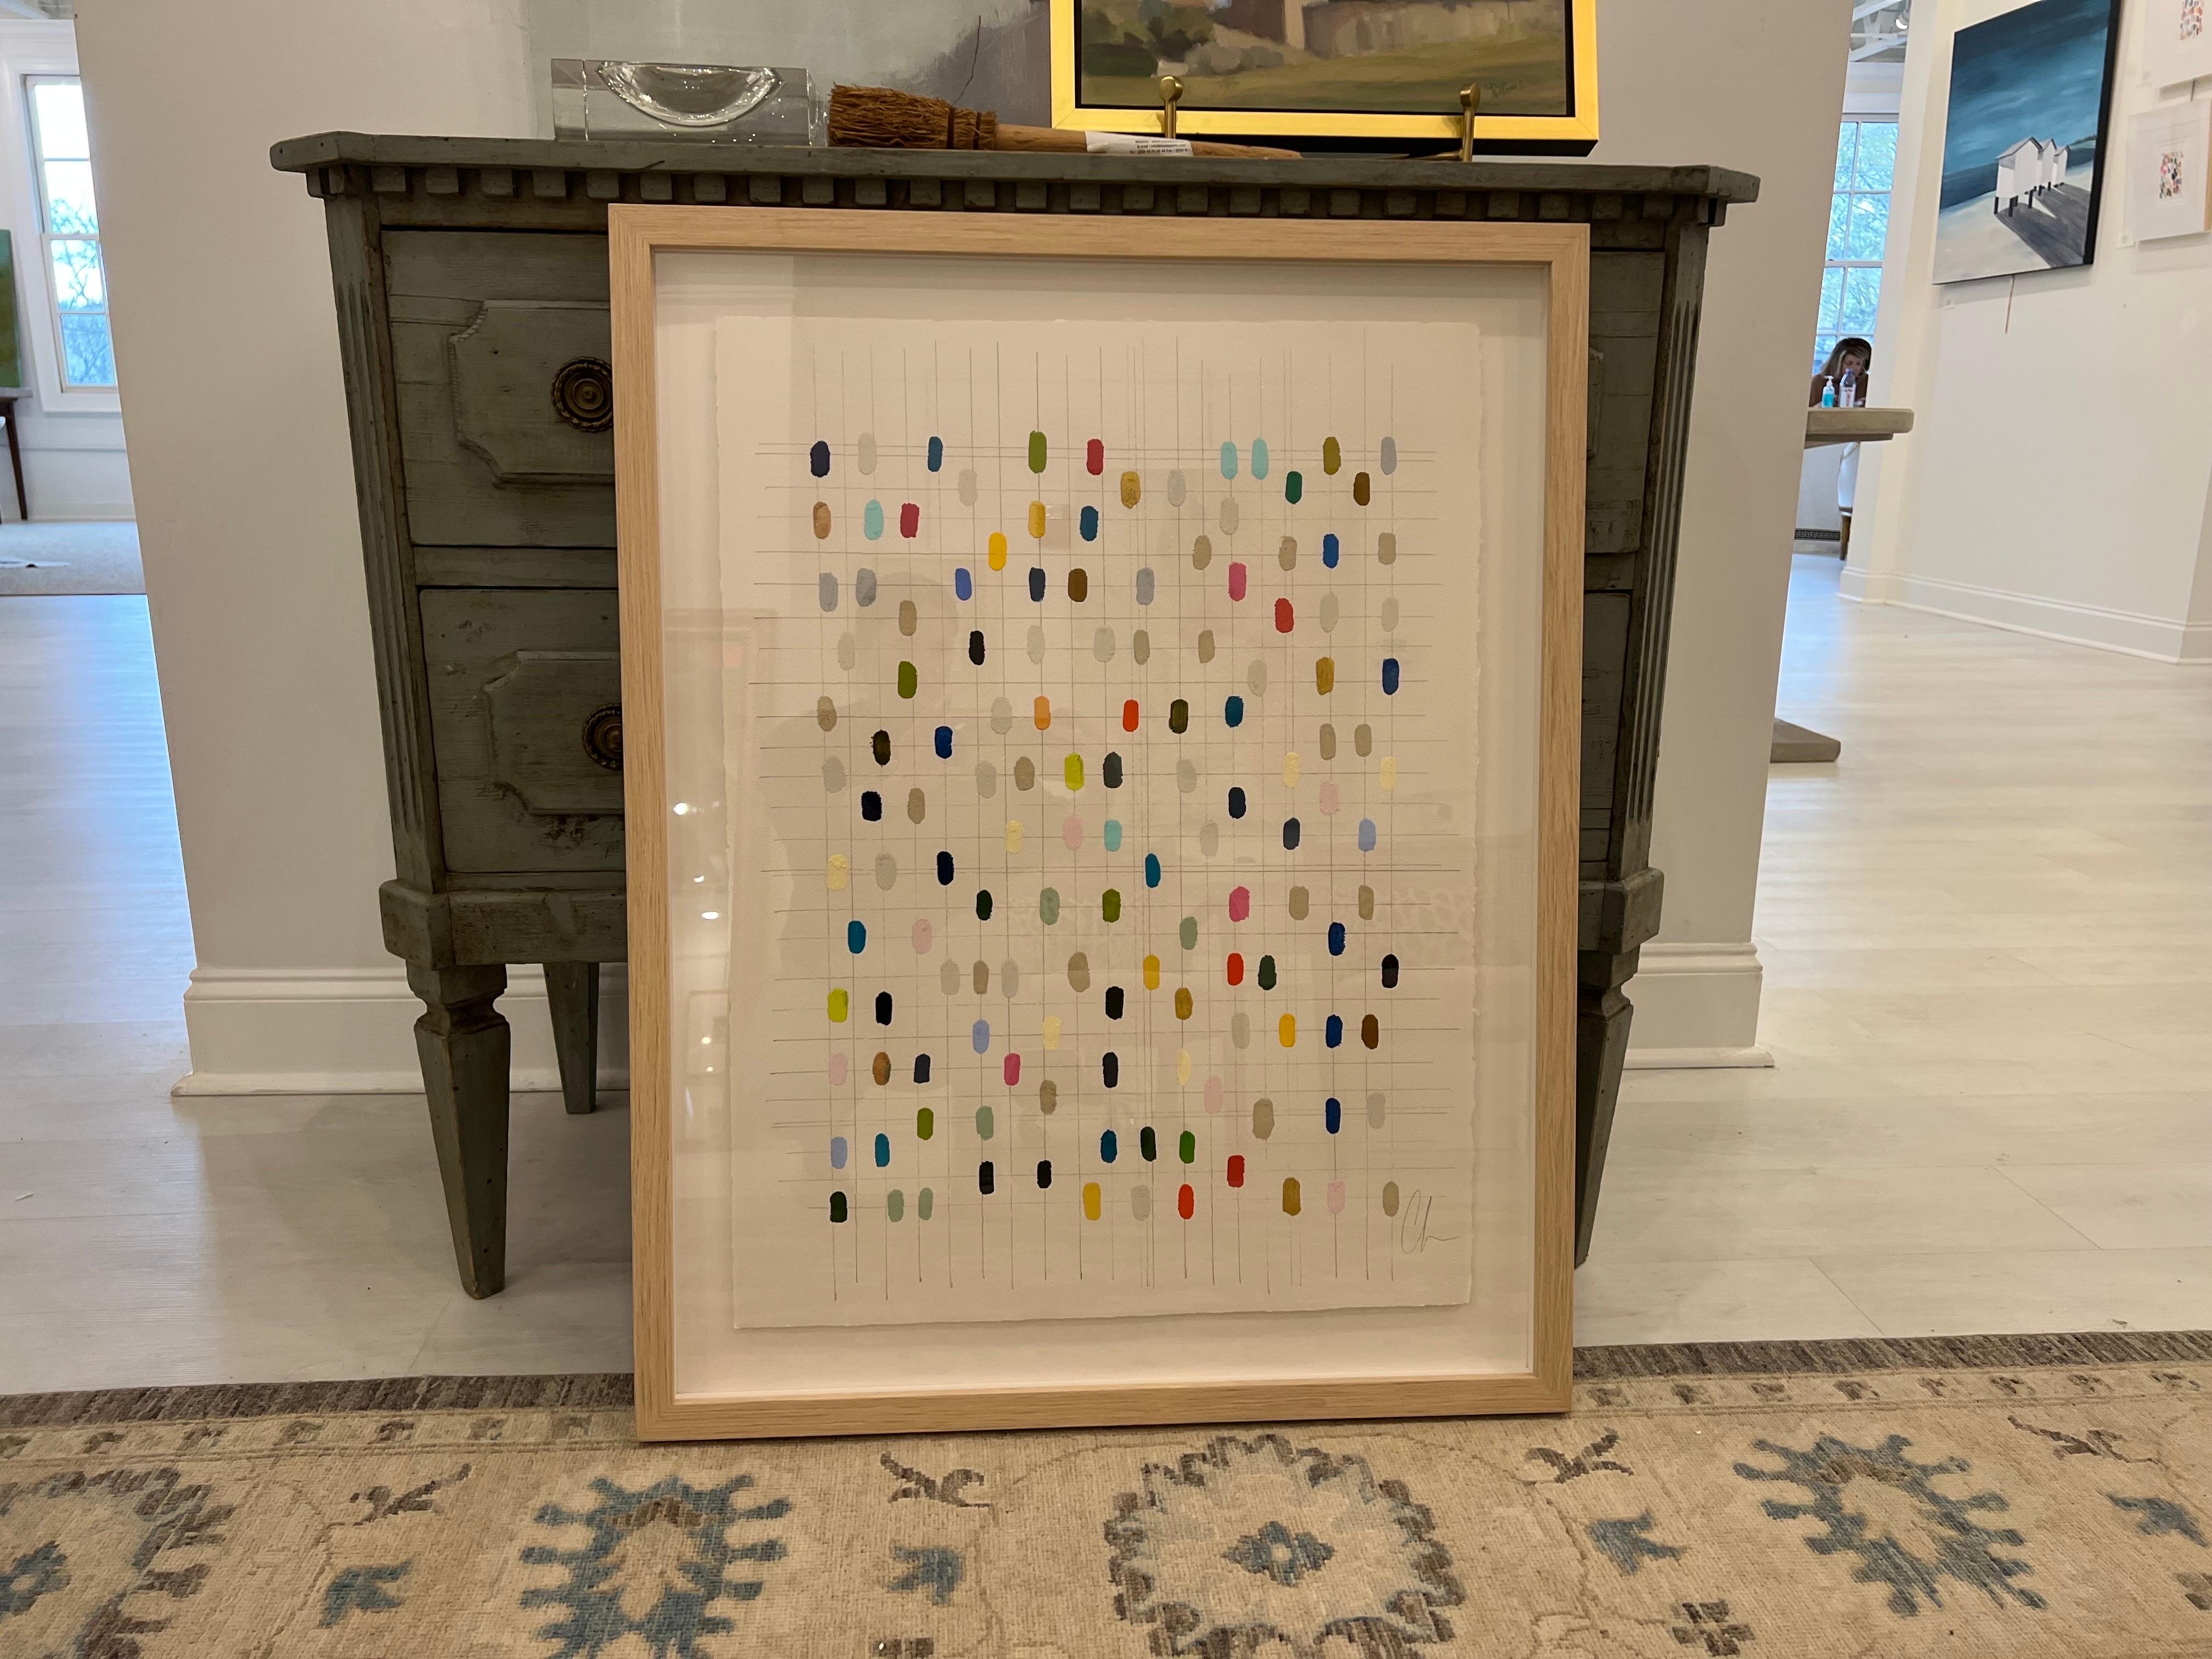 The size includes the frame.

Colleen Leach is a self taught artist.  She believes that art evokes the human spirit. Heavily influenced by music, Colleen's work explores the relationship of playful bold linear works, texture and the use of color